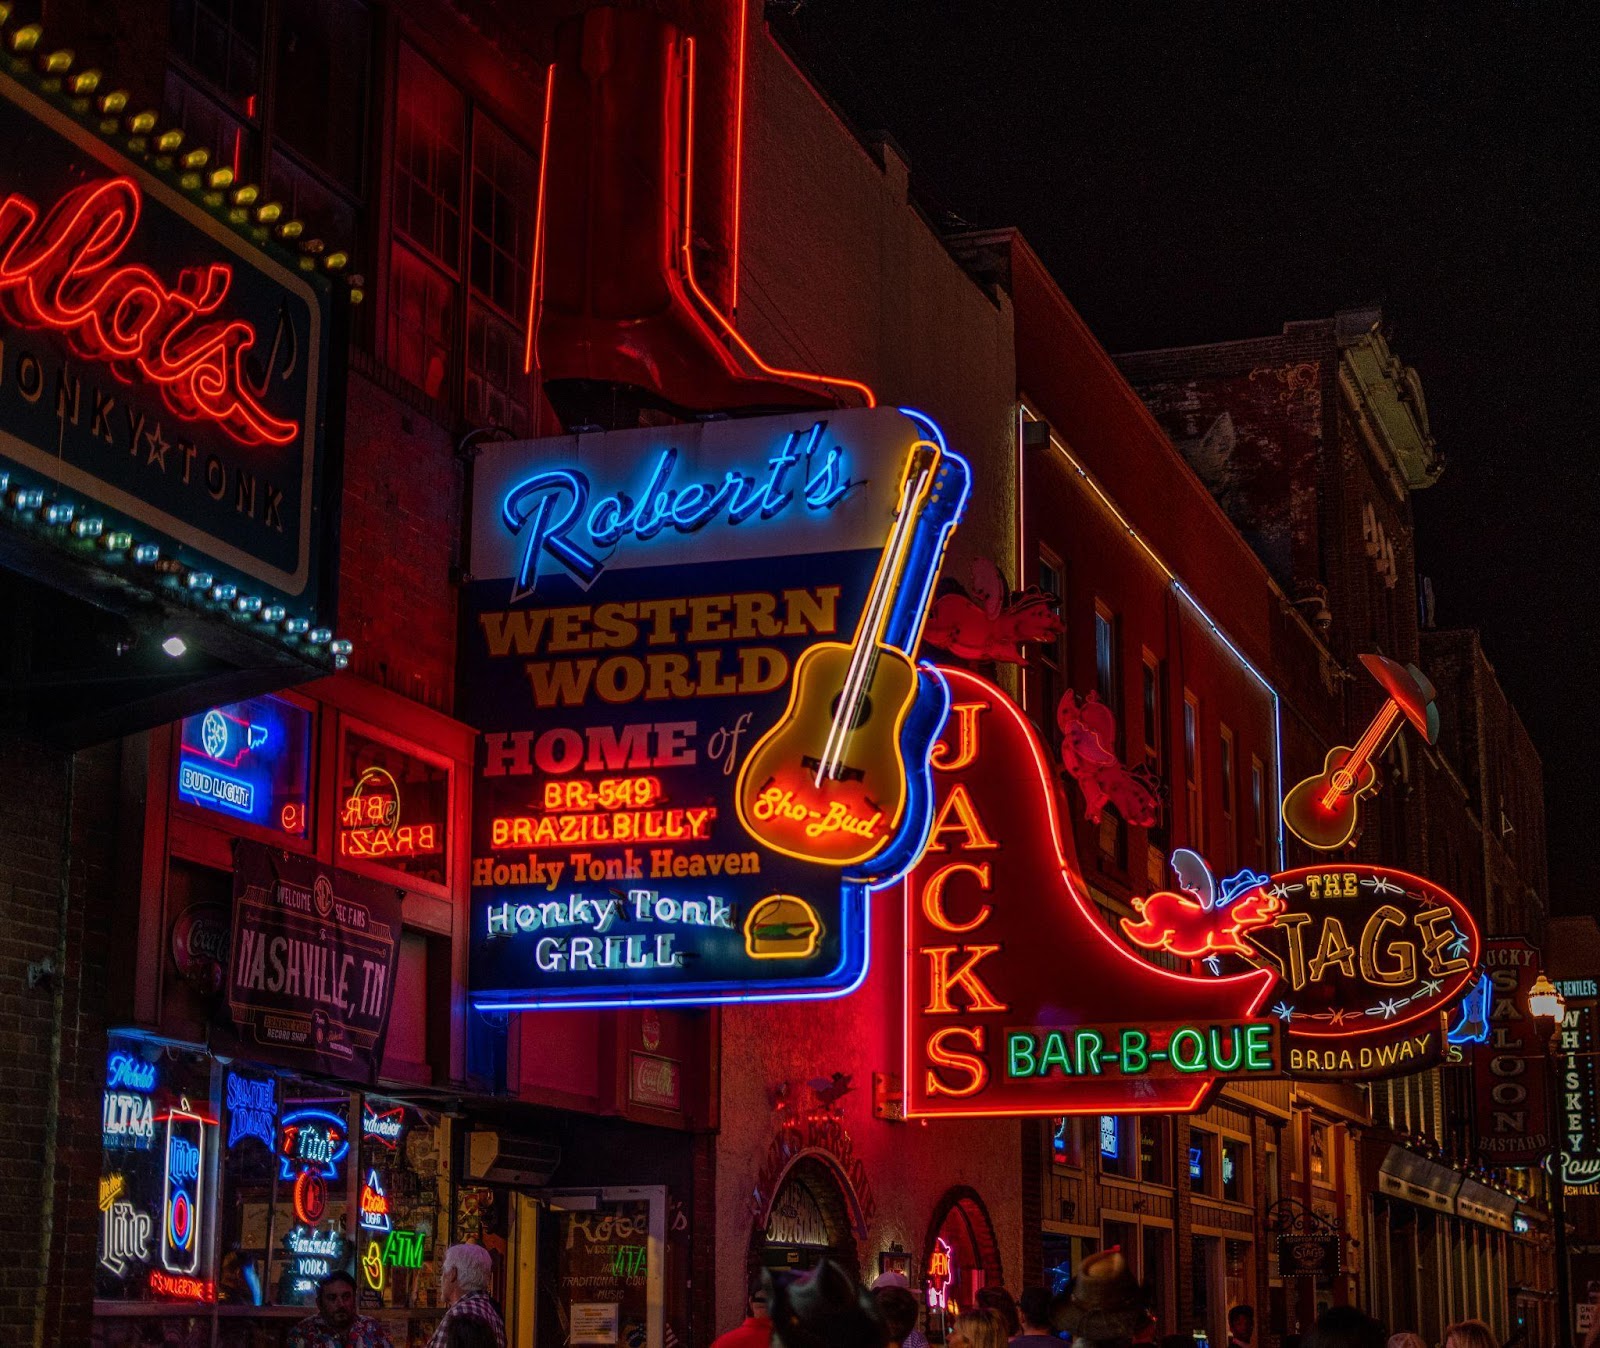  The light-up signs of some of Nashville’s restaurants.